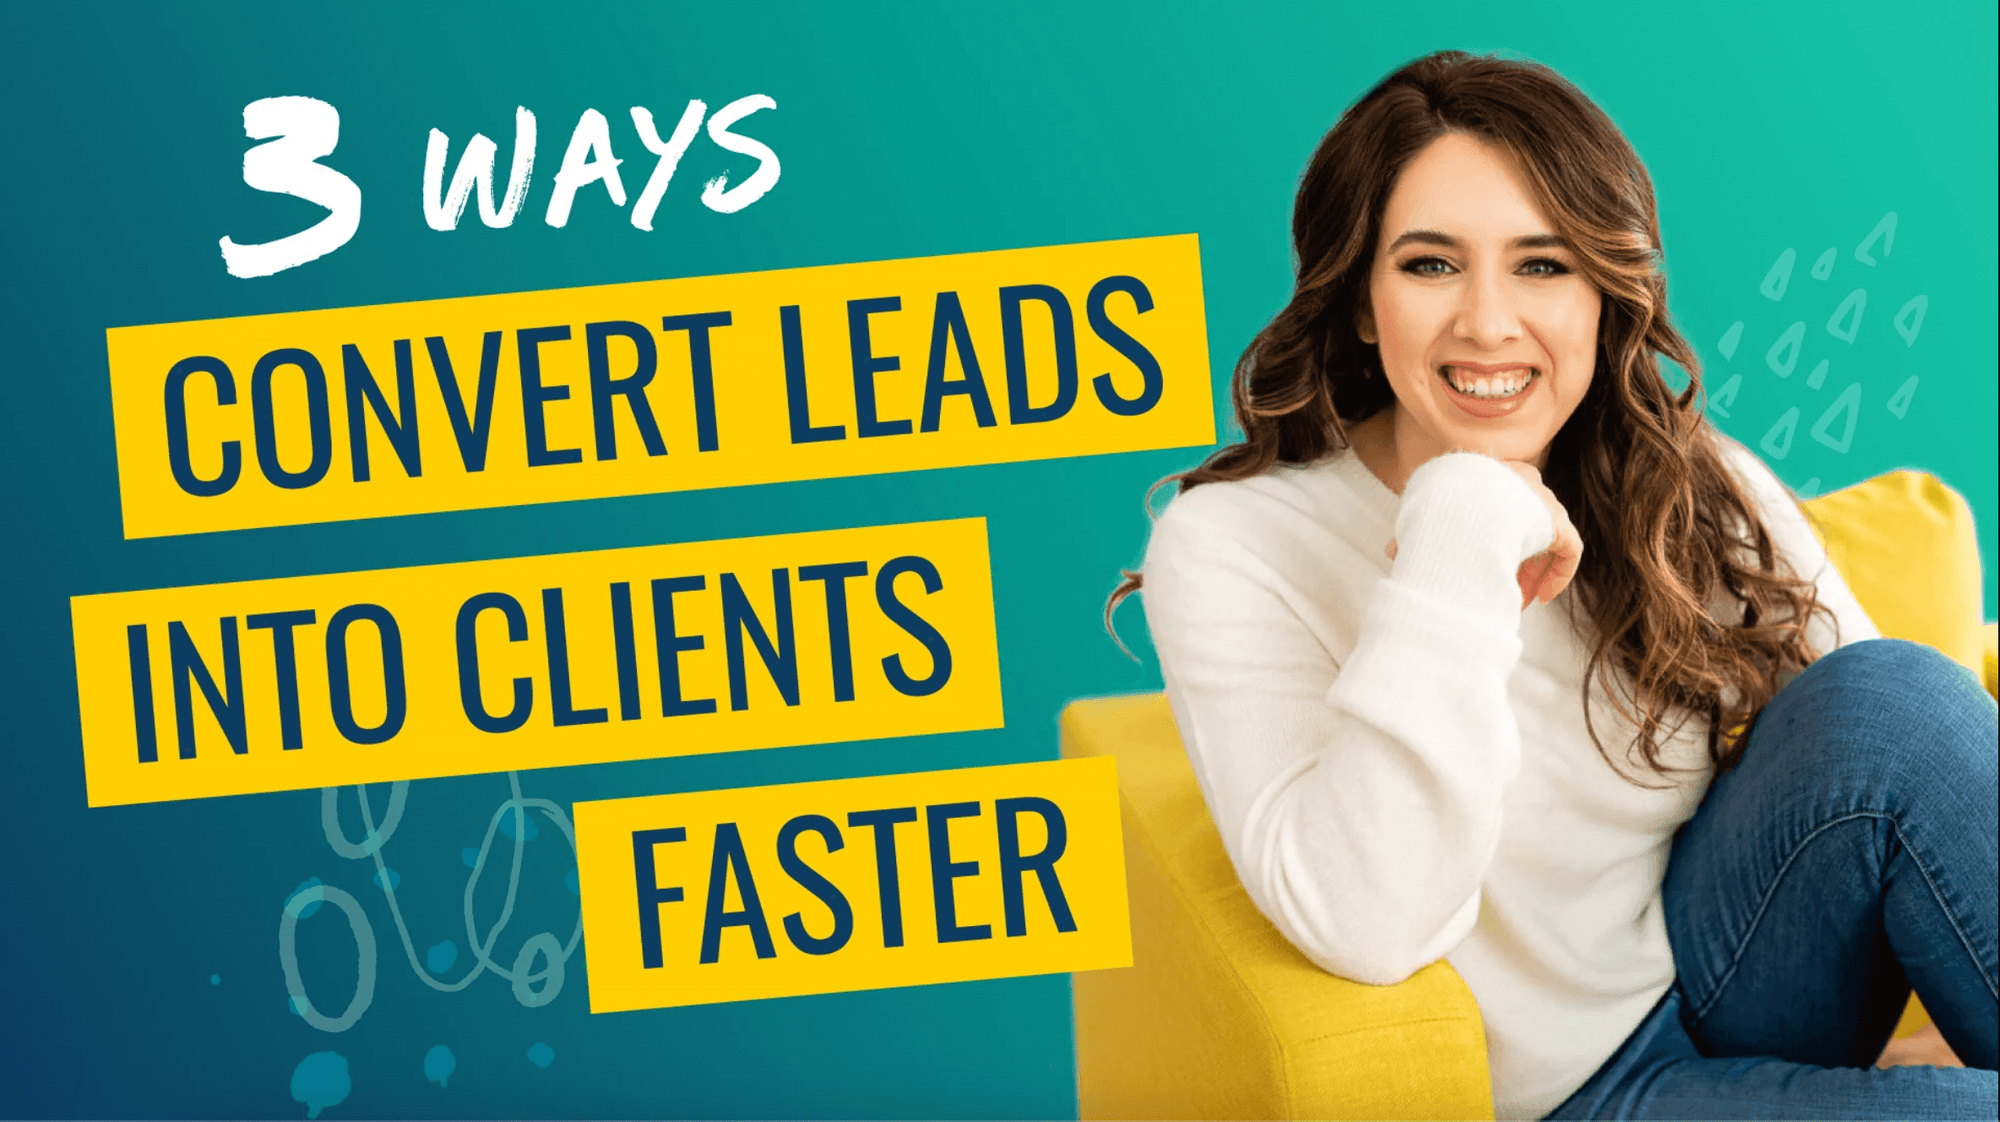 3 Ways to Convert Leads Into Clients Faster